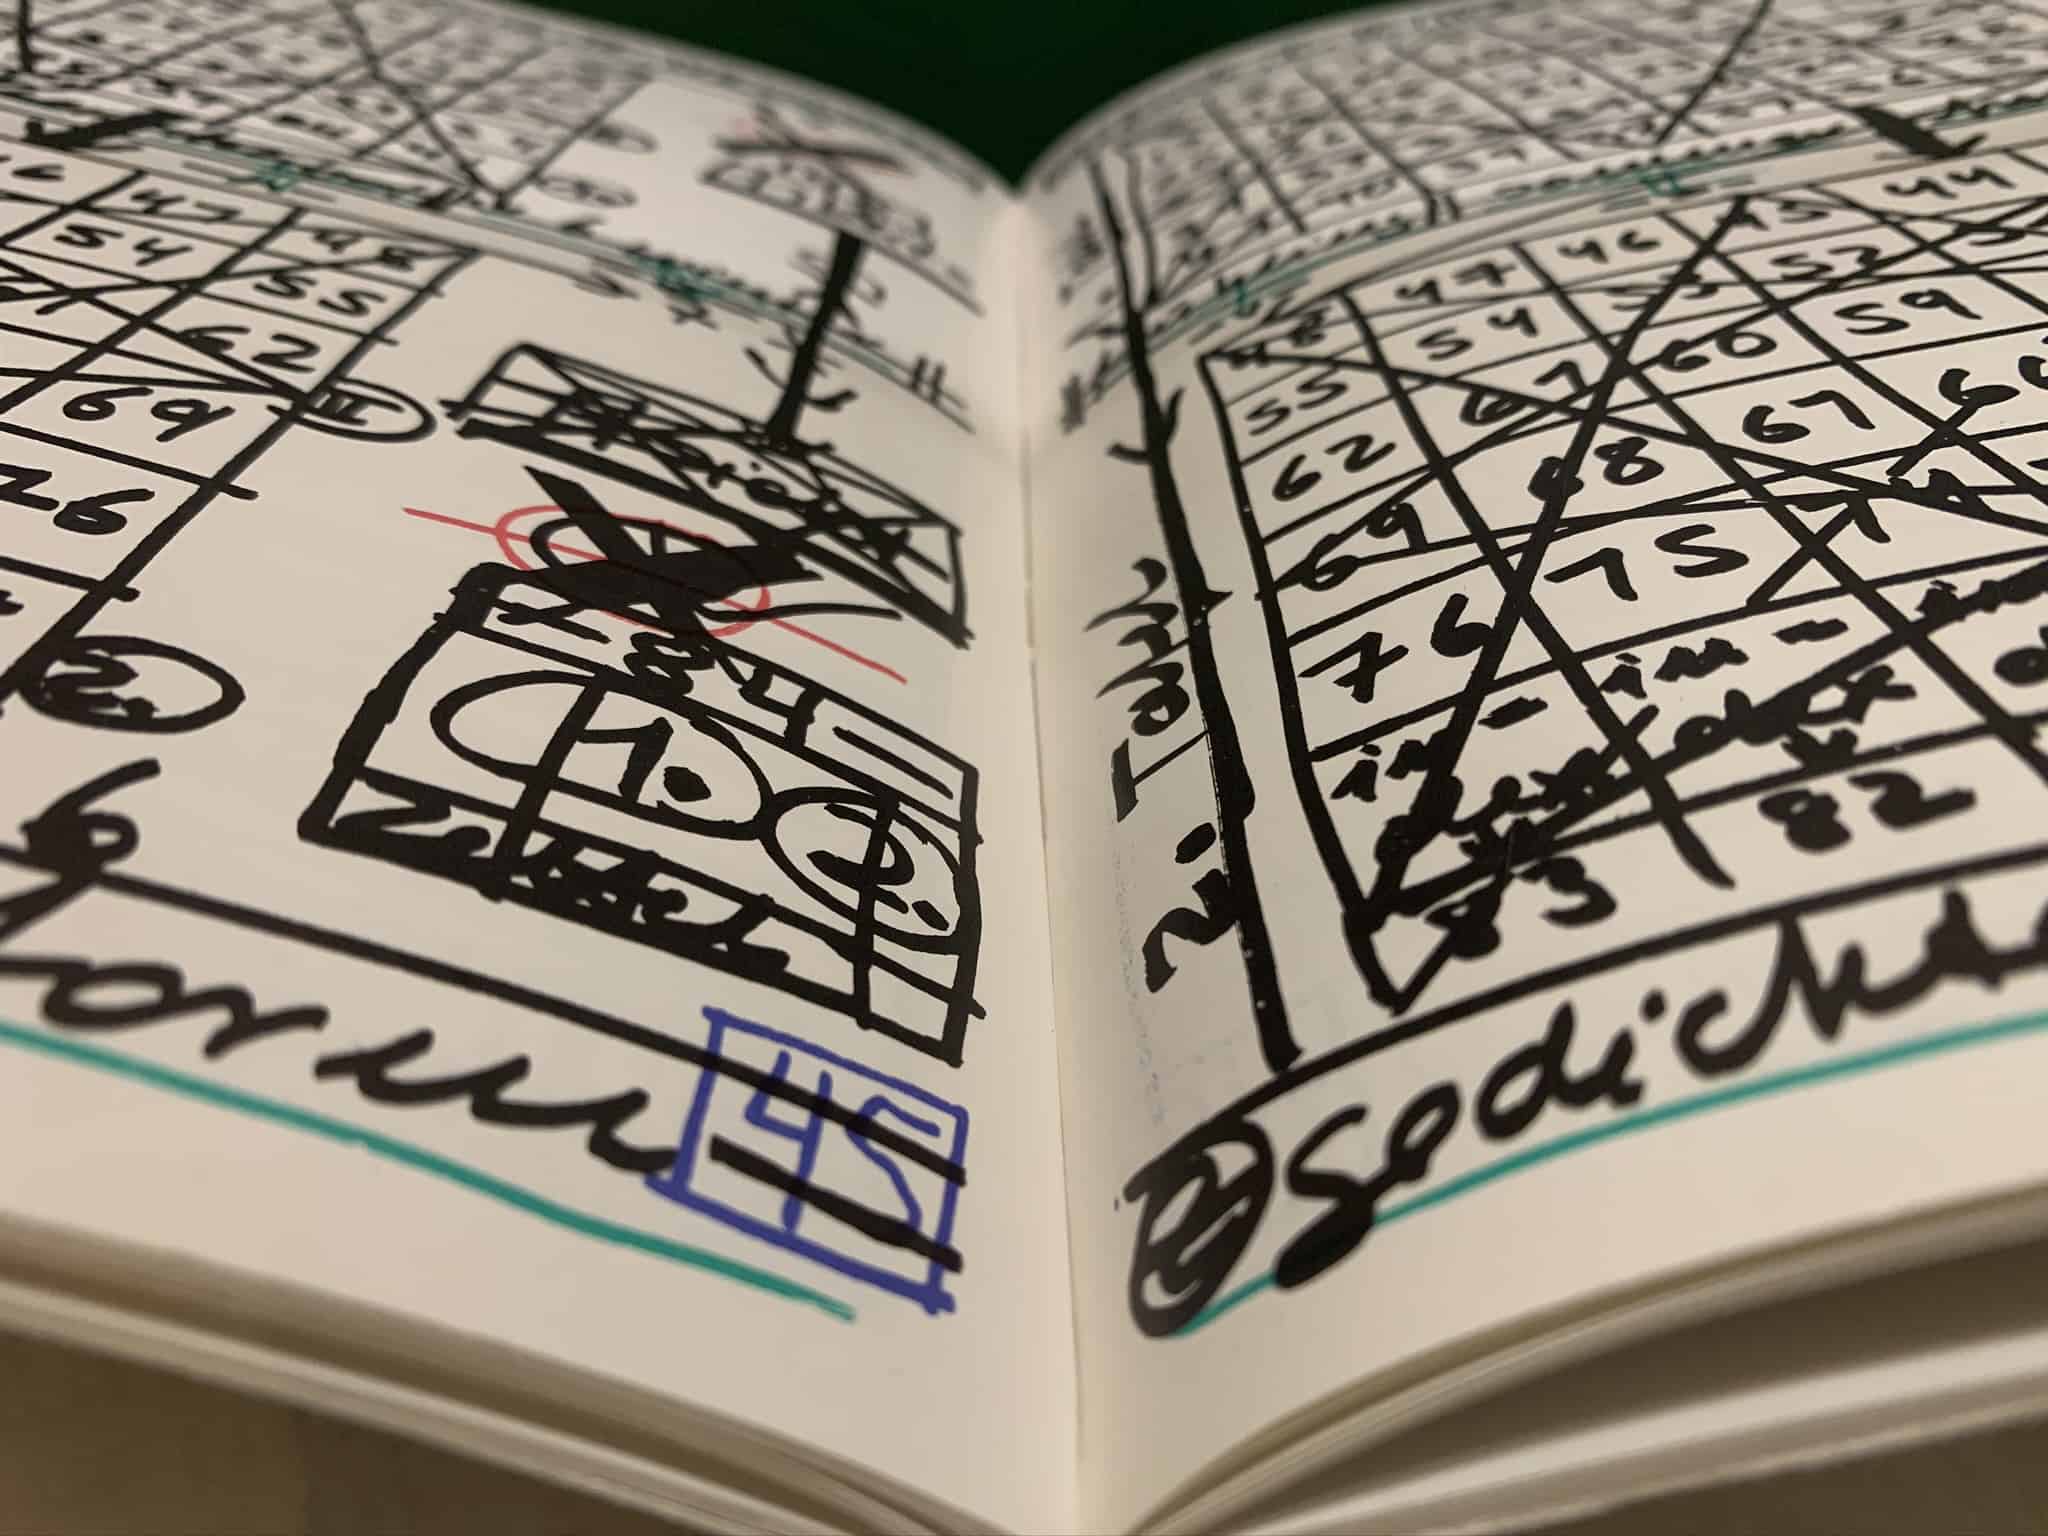 A book open to pages filled with hand drawn grids and numbers.